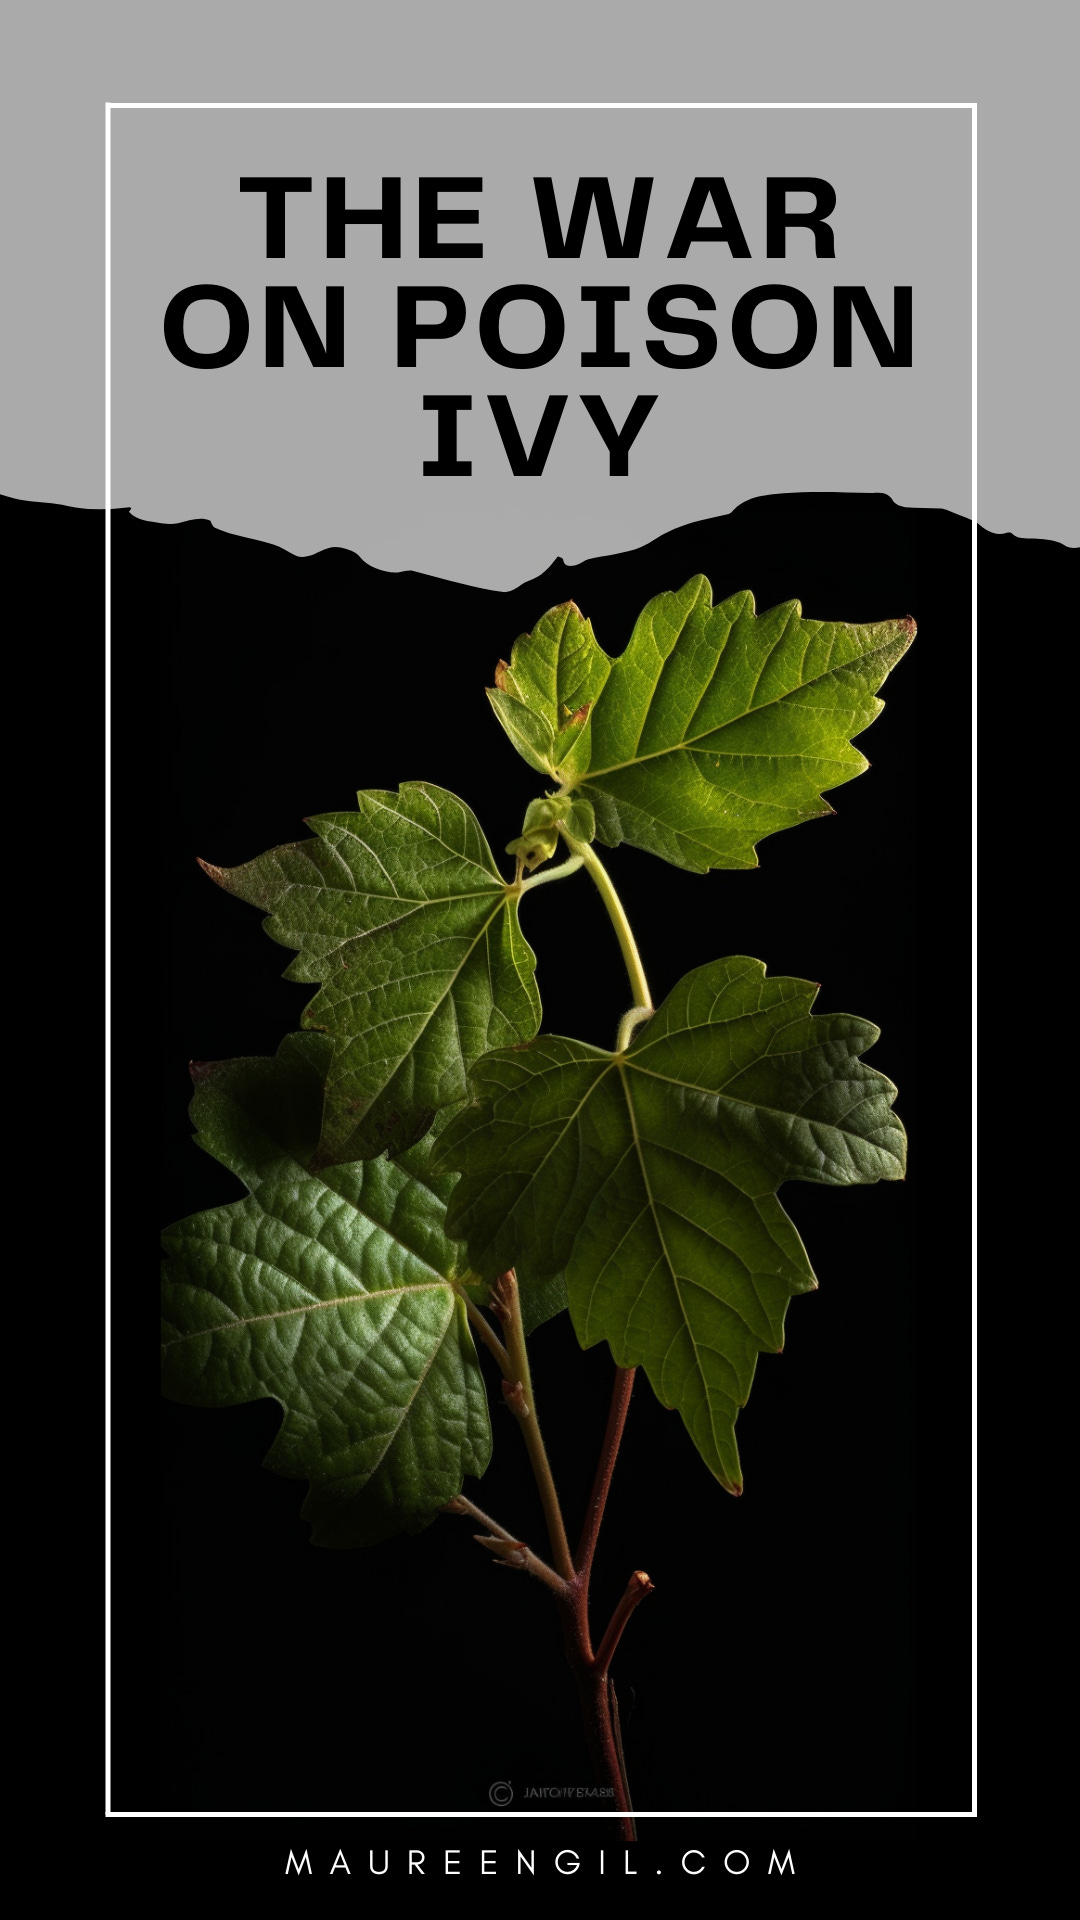 Today, I want to talk about the evil little bastards known as poison ivy (Toxicodendron radicans) and, by extension, its evil cousin, poison sumac (Toxicodendron vernix). Not everyone in the world is susceptible to these plants, but I can say with all scientific fact and proof that my husband and I make up for their lack of an allergic reaction. Over the last few weeks, we’ve been in a war. 